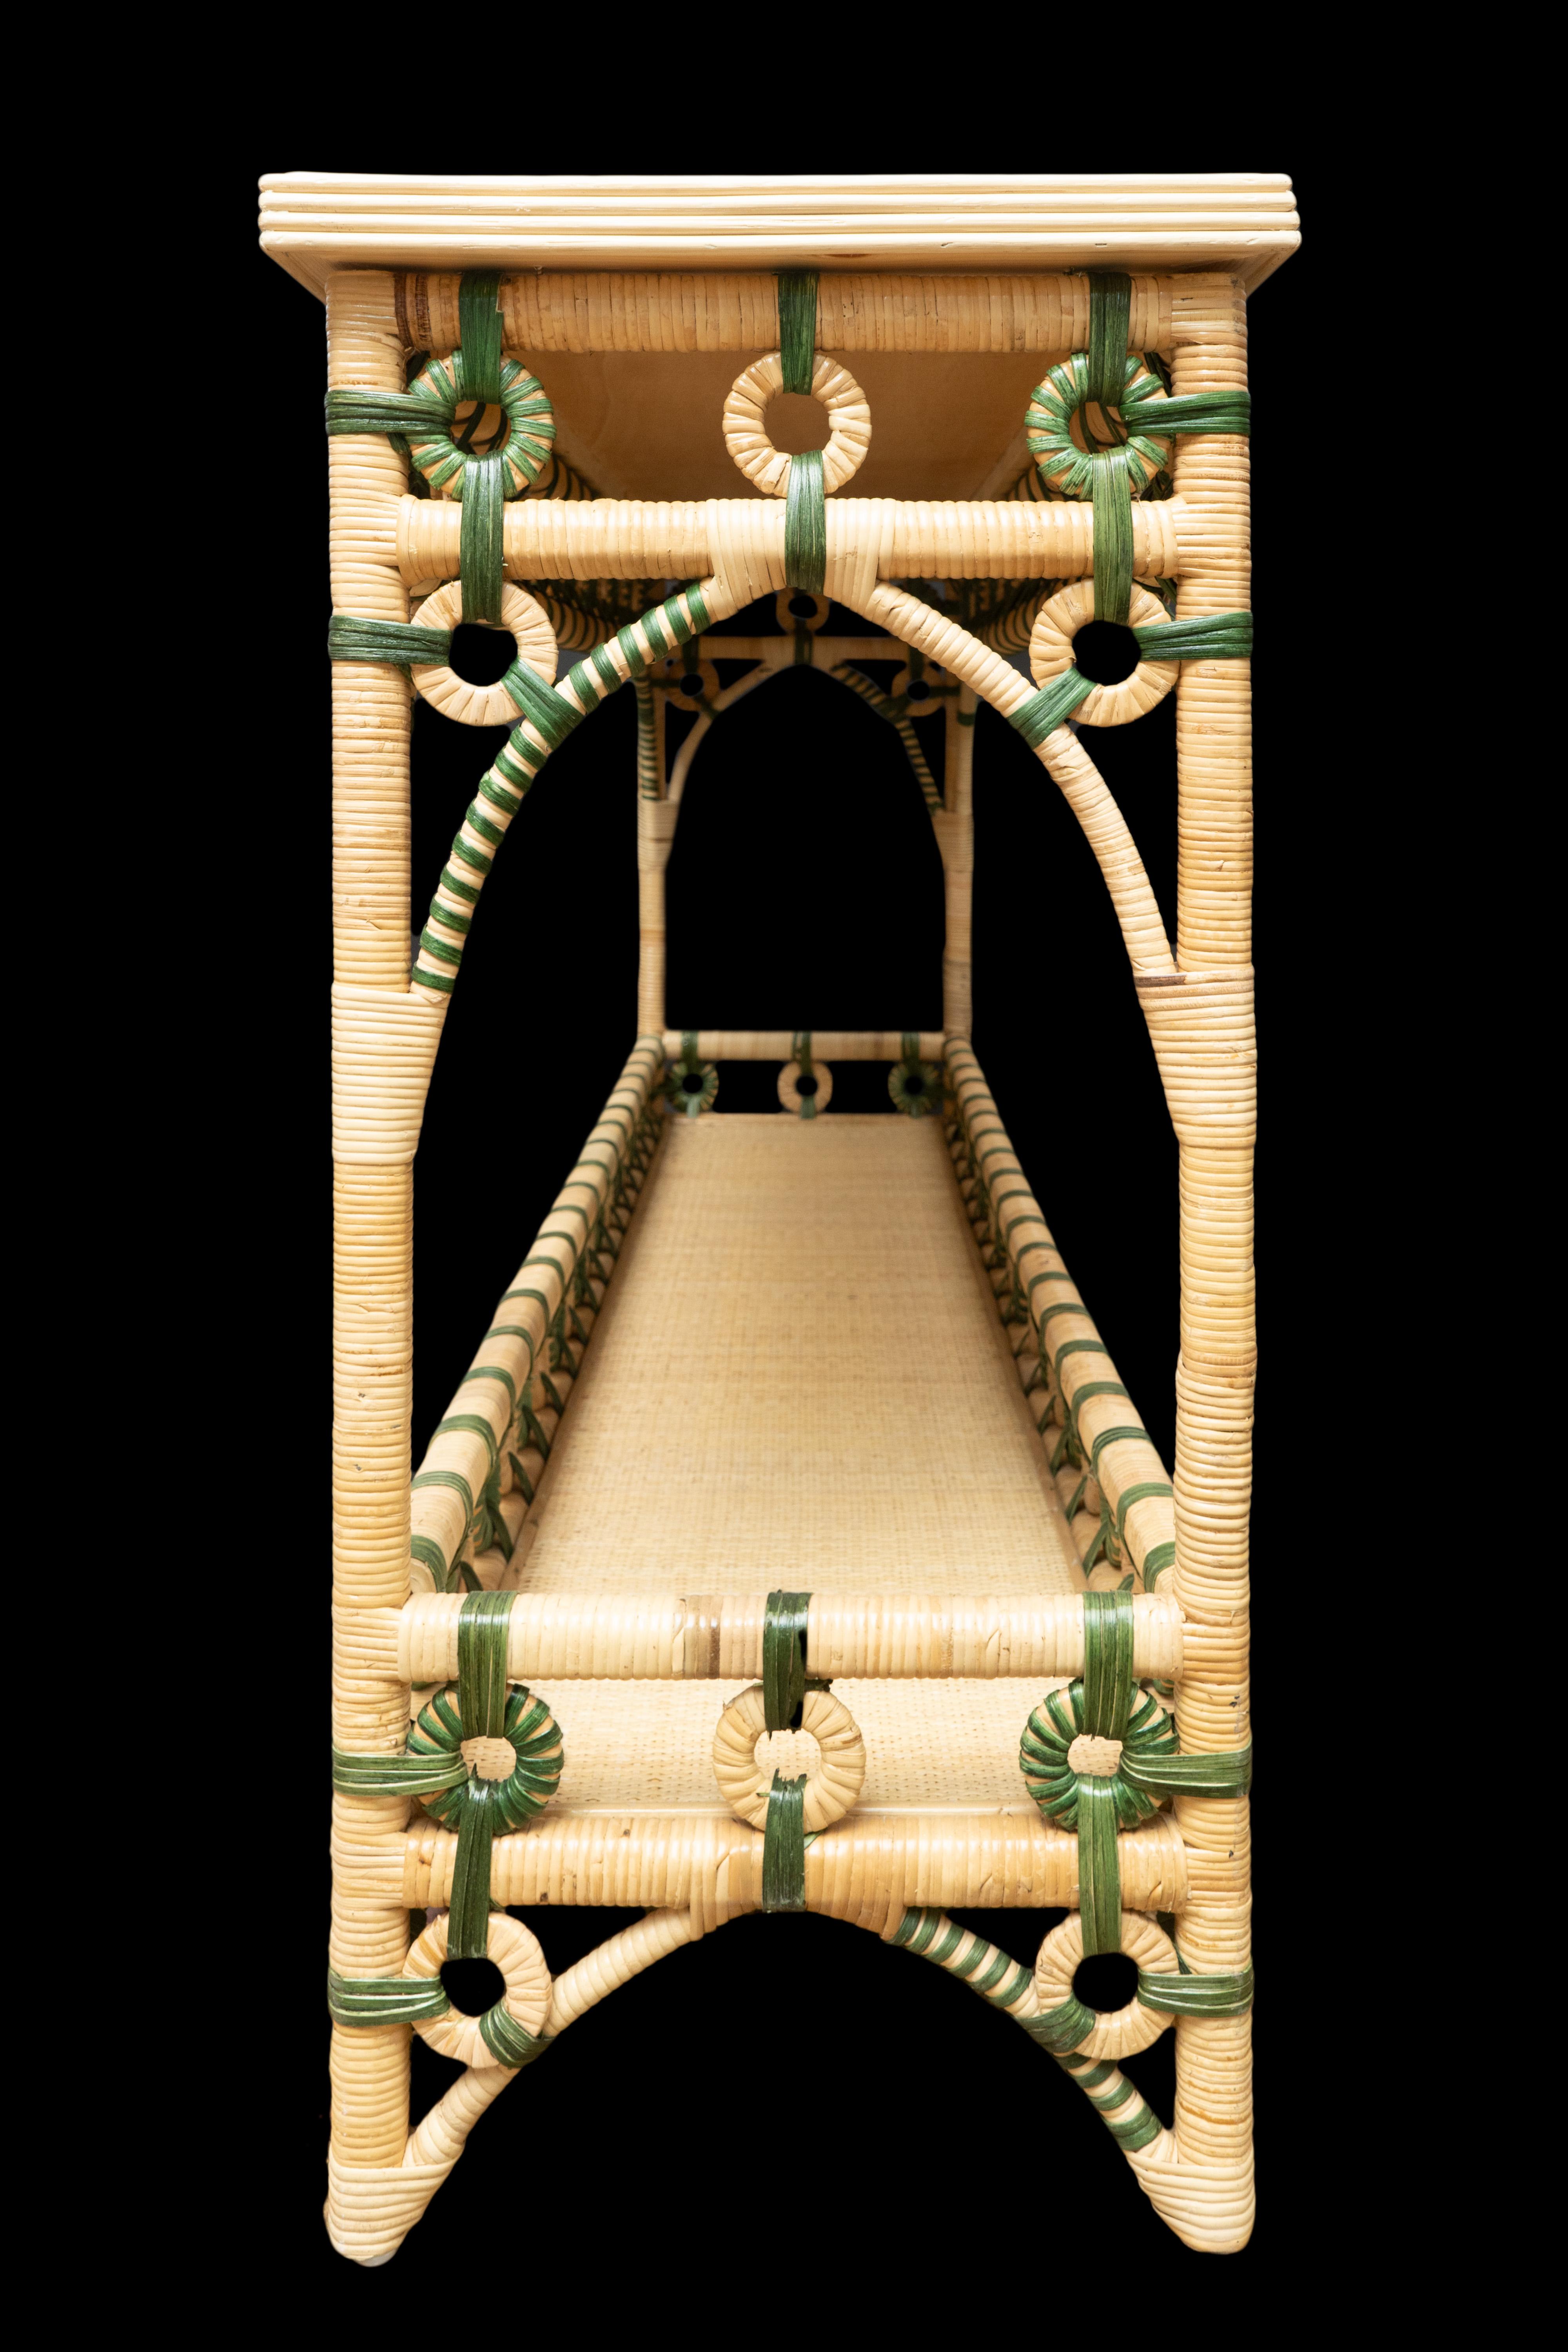 Rattan console green and cream: made exclusively for Creel and Gow in Morocco.

Measures: 65